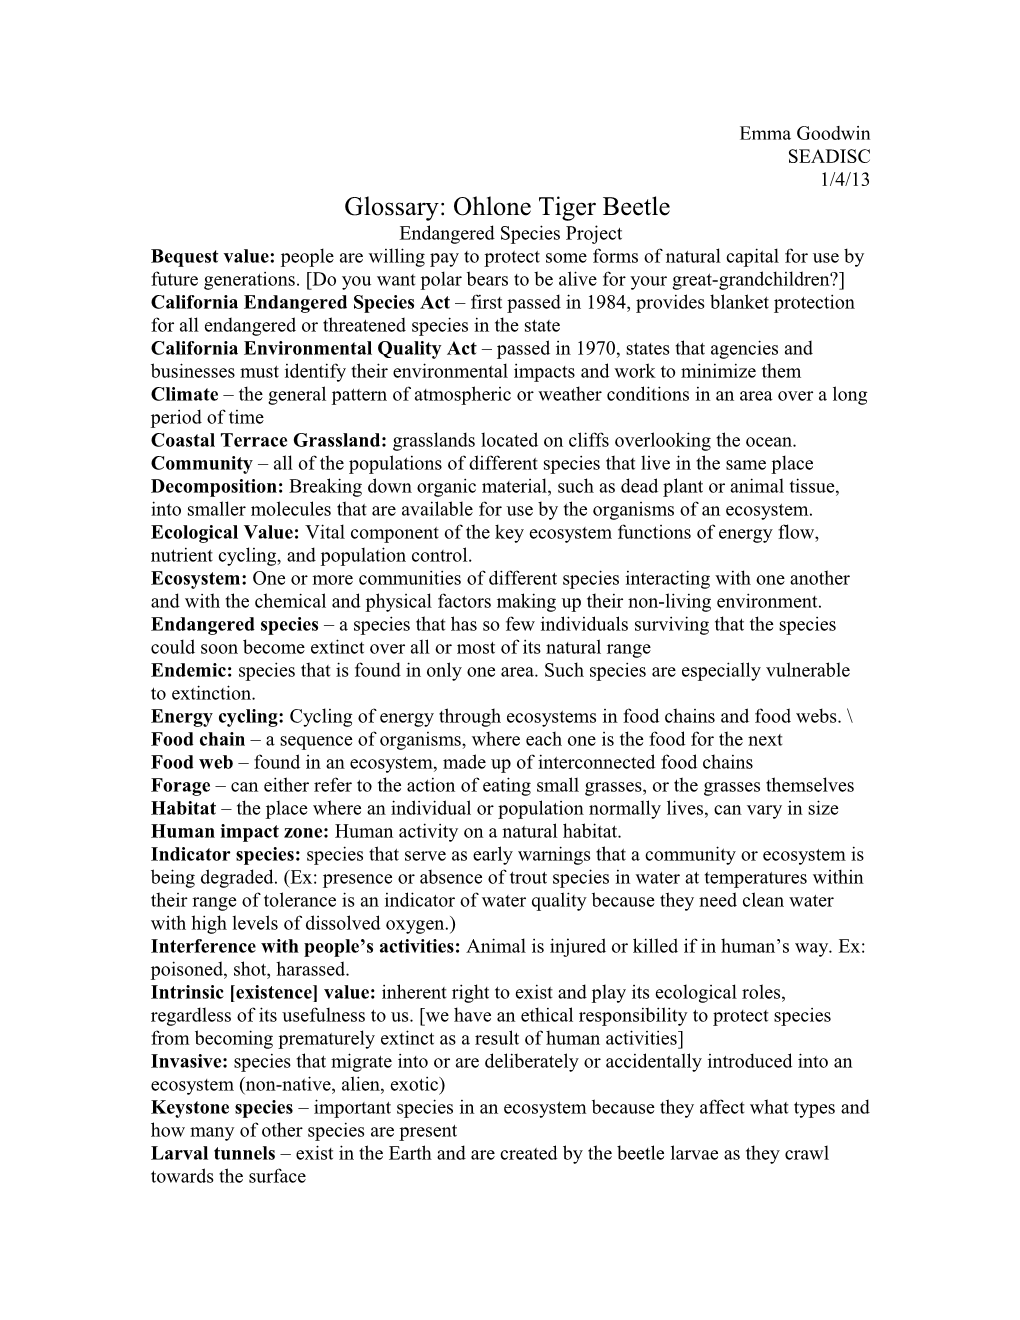 Glossary: Ohlone Tiger Beetle